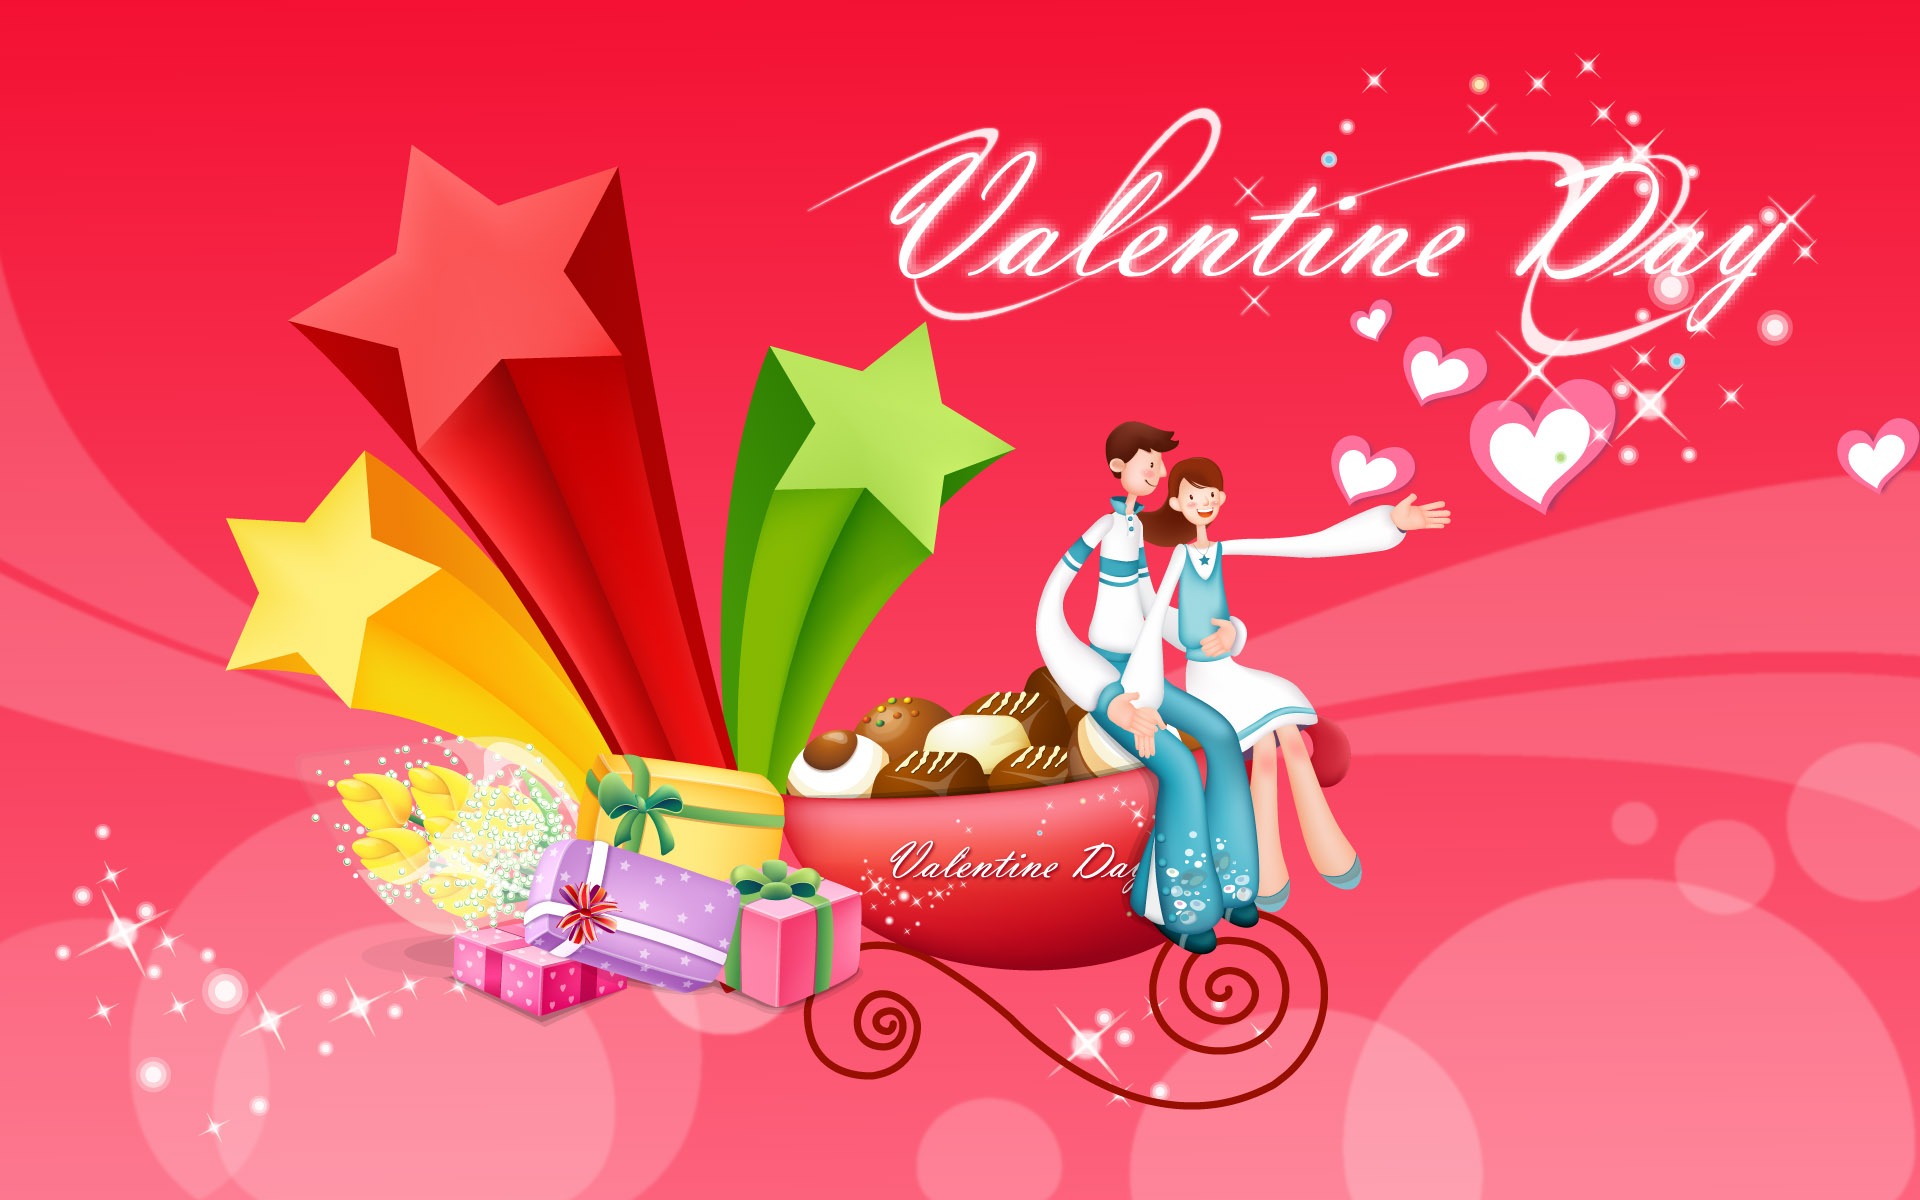 Valentine's Day Theme Wallpapers (2) #1 - 1920x1200